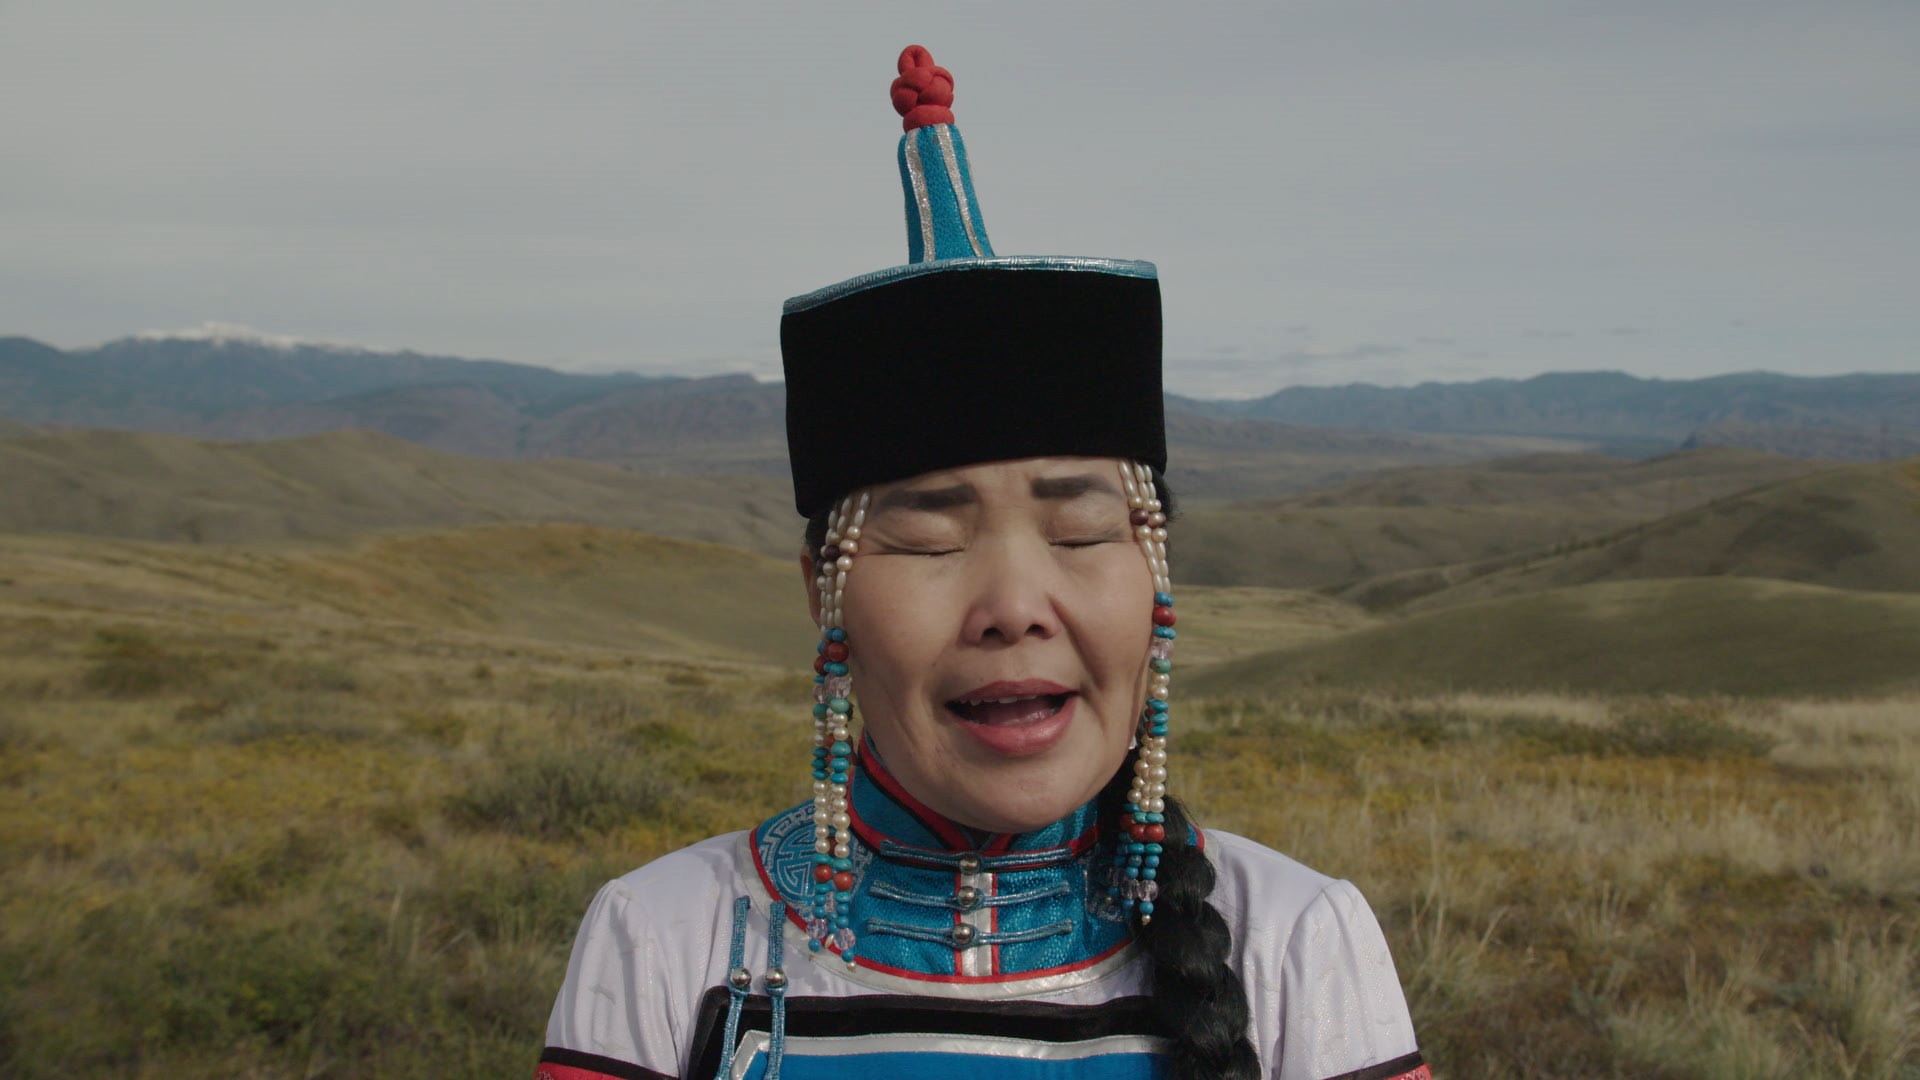 A Tuvan woman in traditional clothing sings with eyes closed, grassland in background